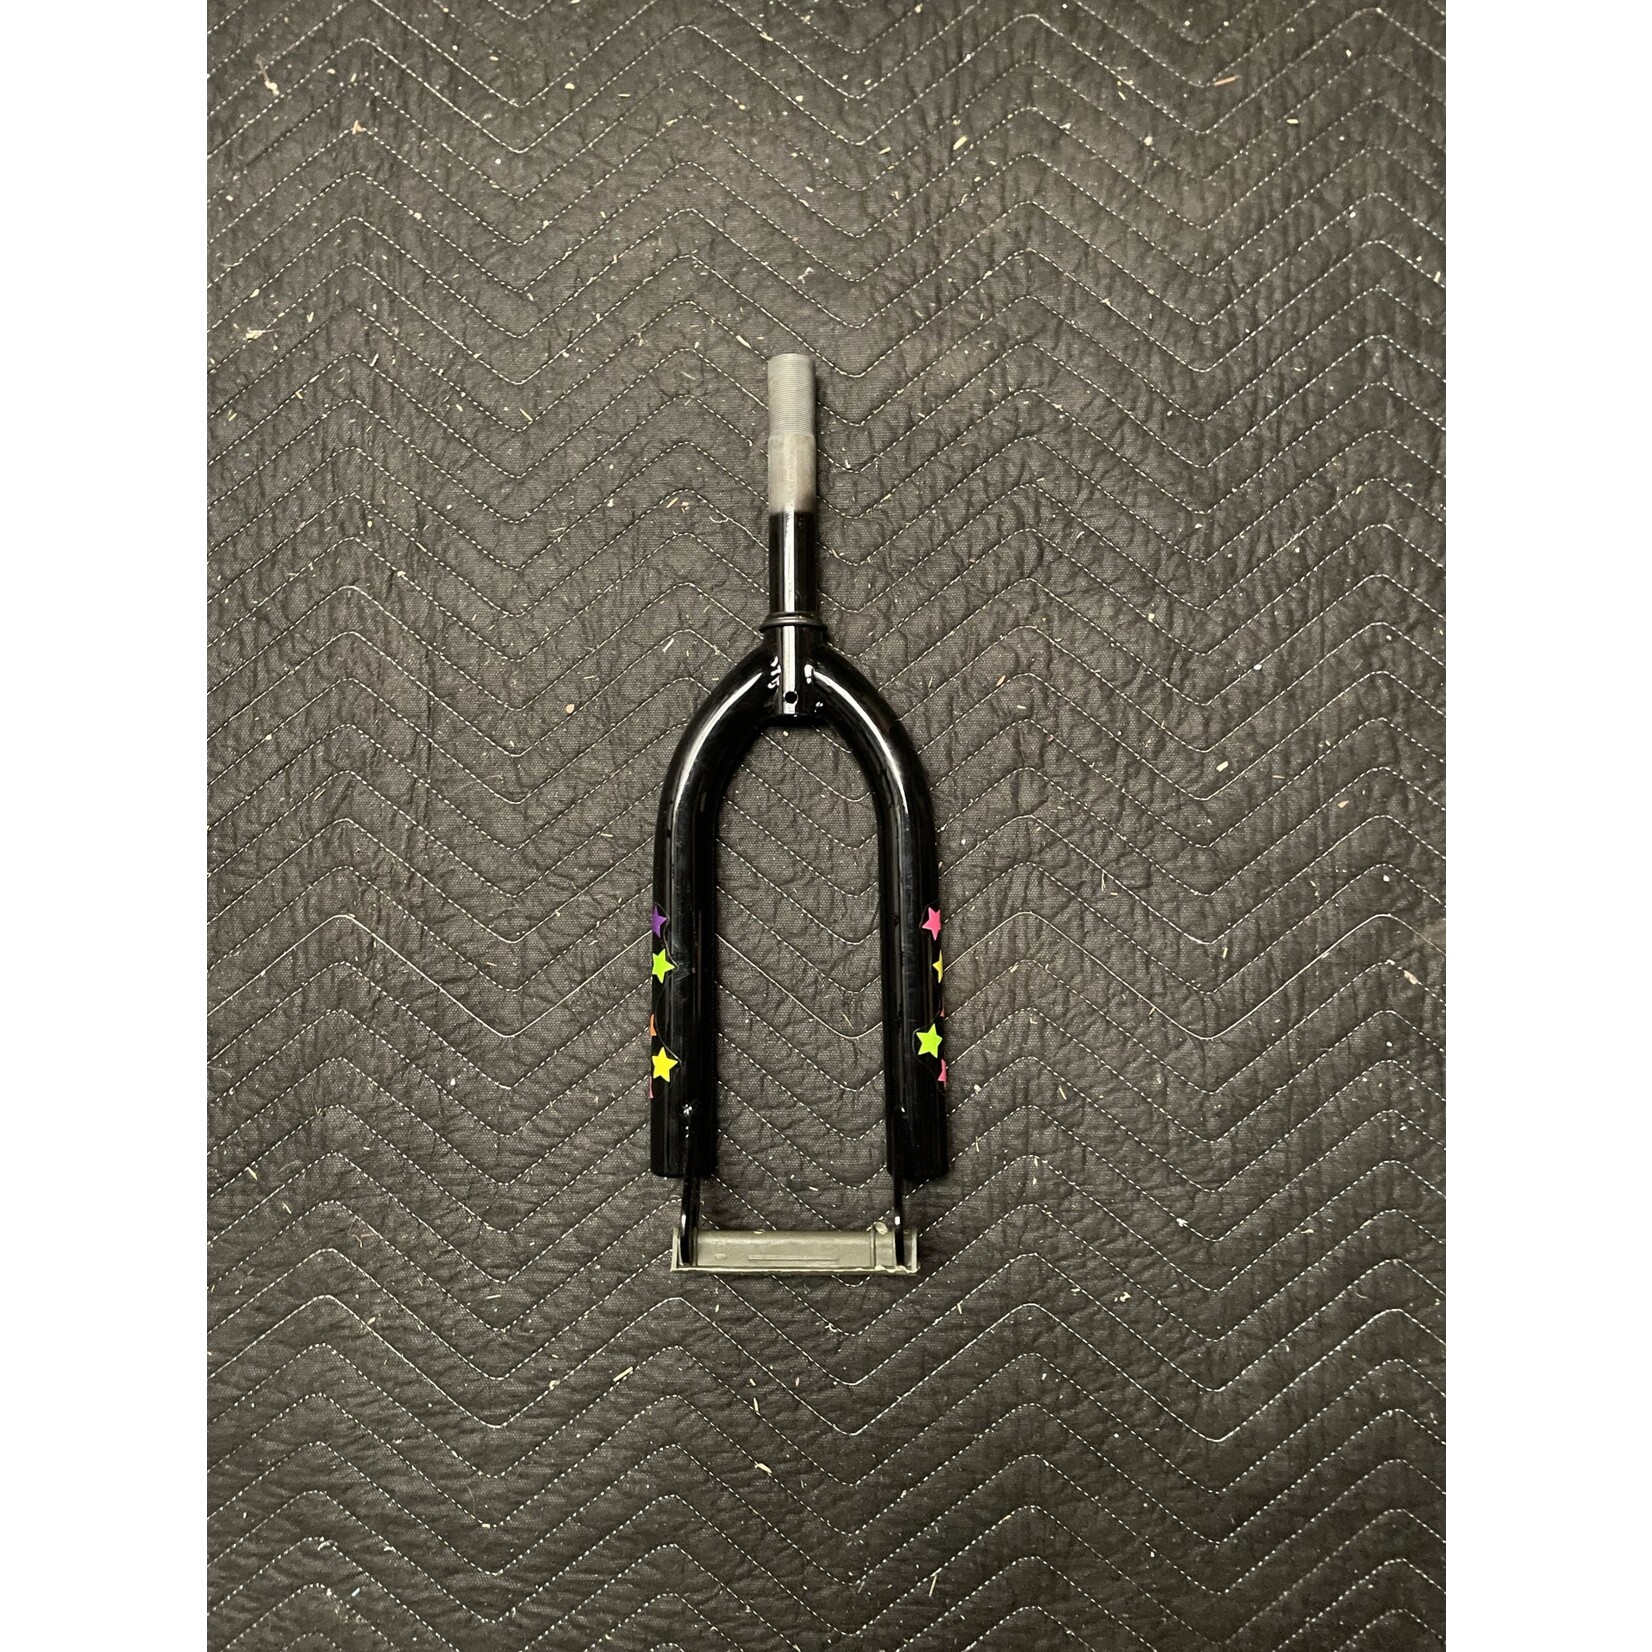 1” x 5 1/2” Threaded 18” Bicycle Fork (Black w/ Multi-Color Stars)